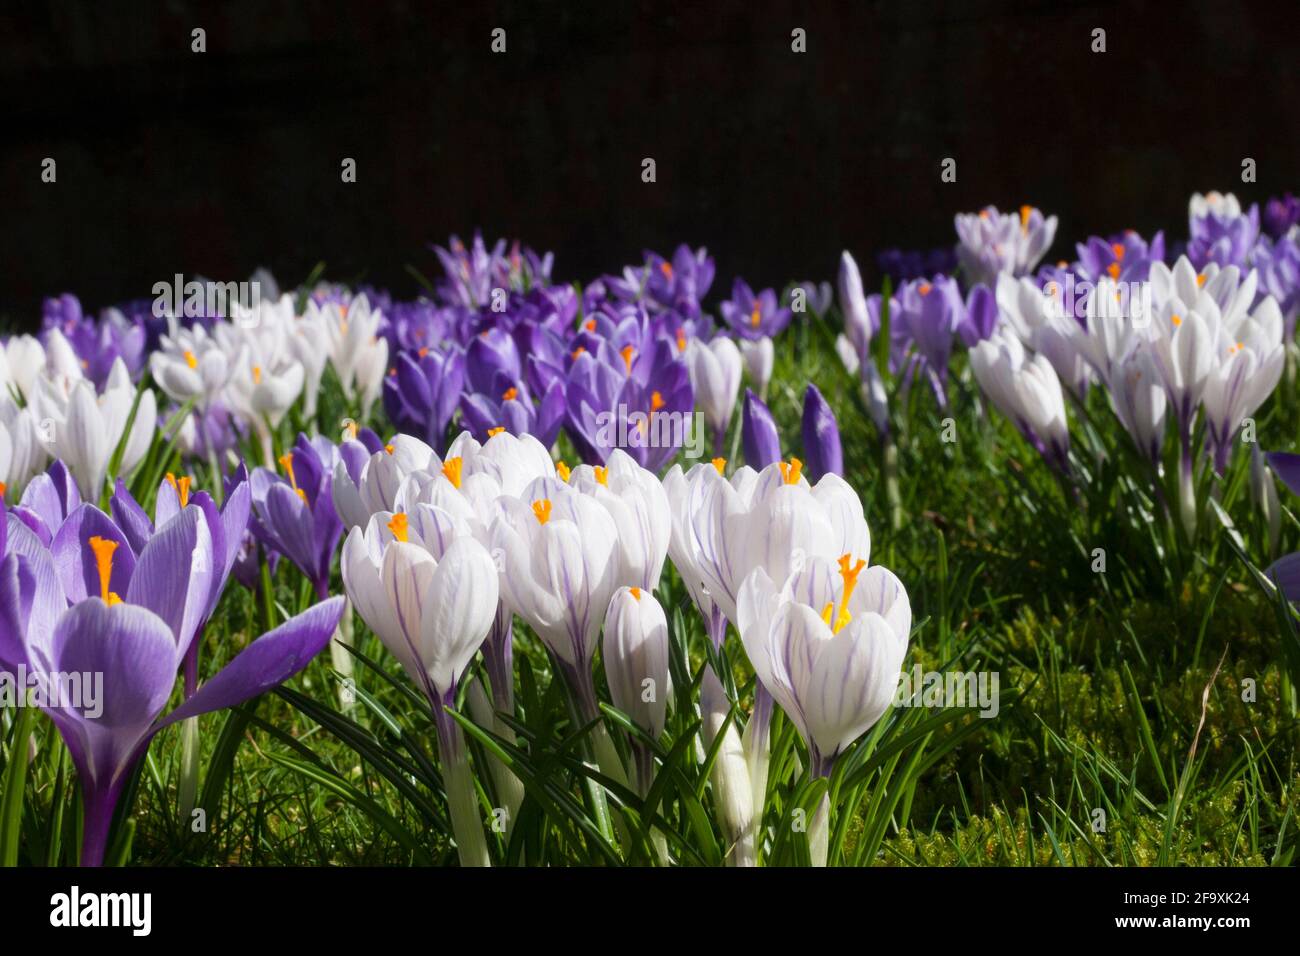 Spring crocus growing in a grassy lawn. Stock Photo